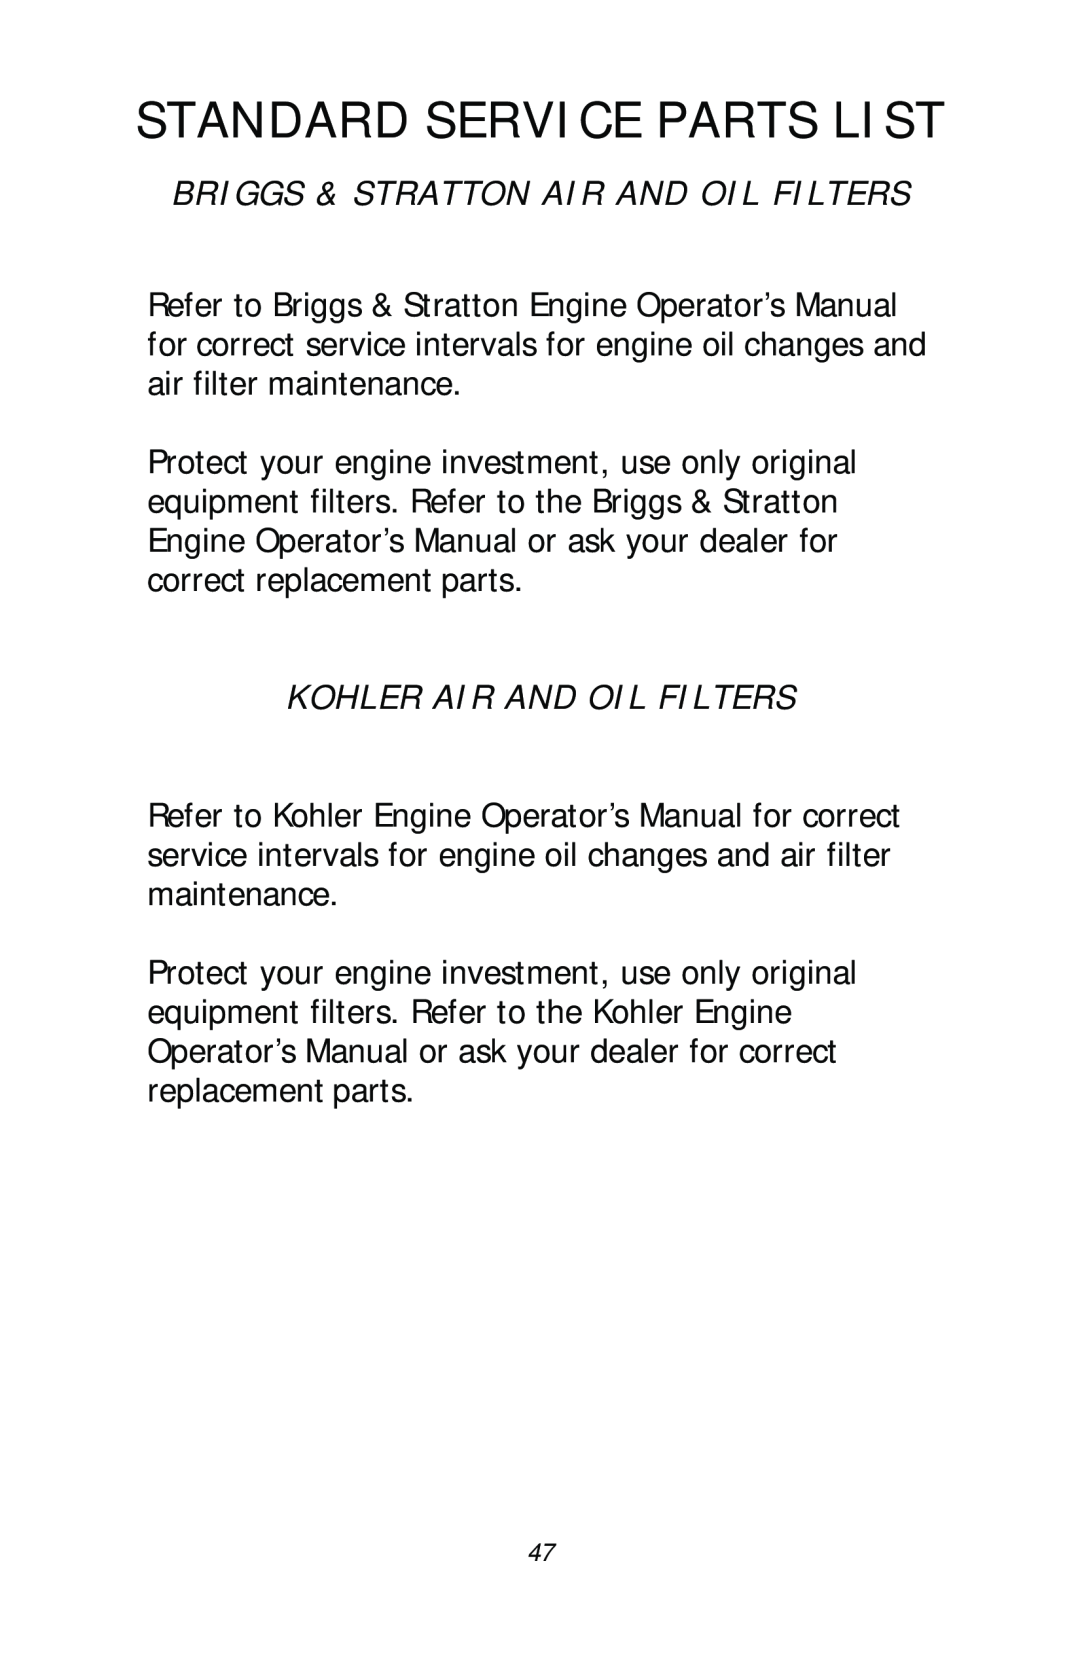 Dixon 13782-0503, ZTR 4516 Standard Service Parts List, Briggs & Stratton Air And Oil Filters, Kohler Air And Oil Filters 